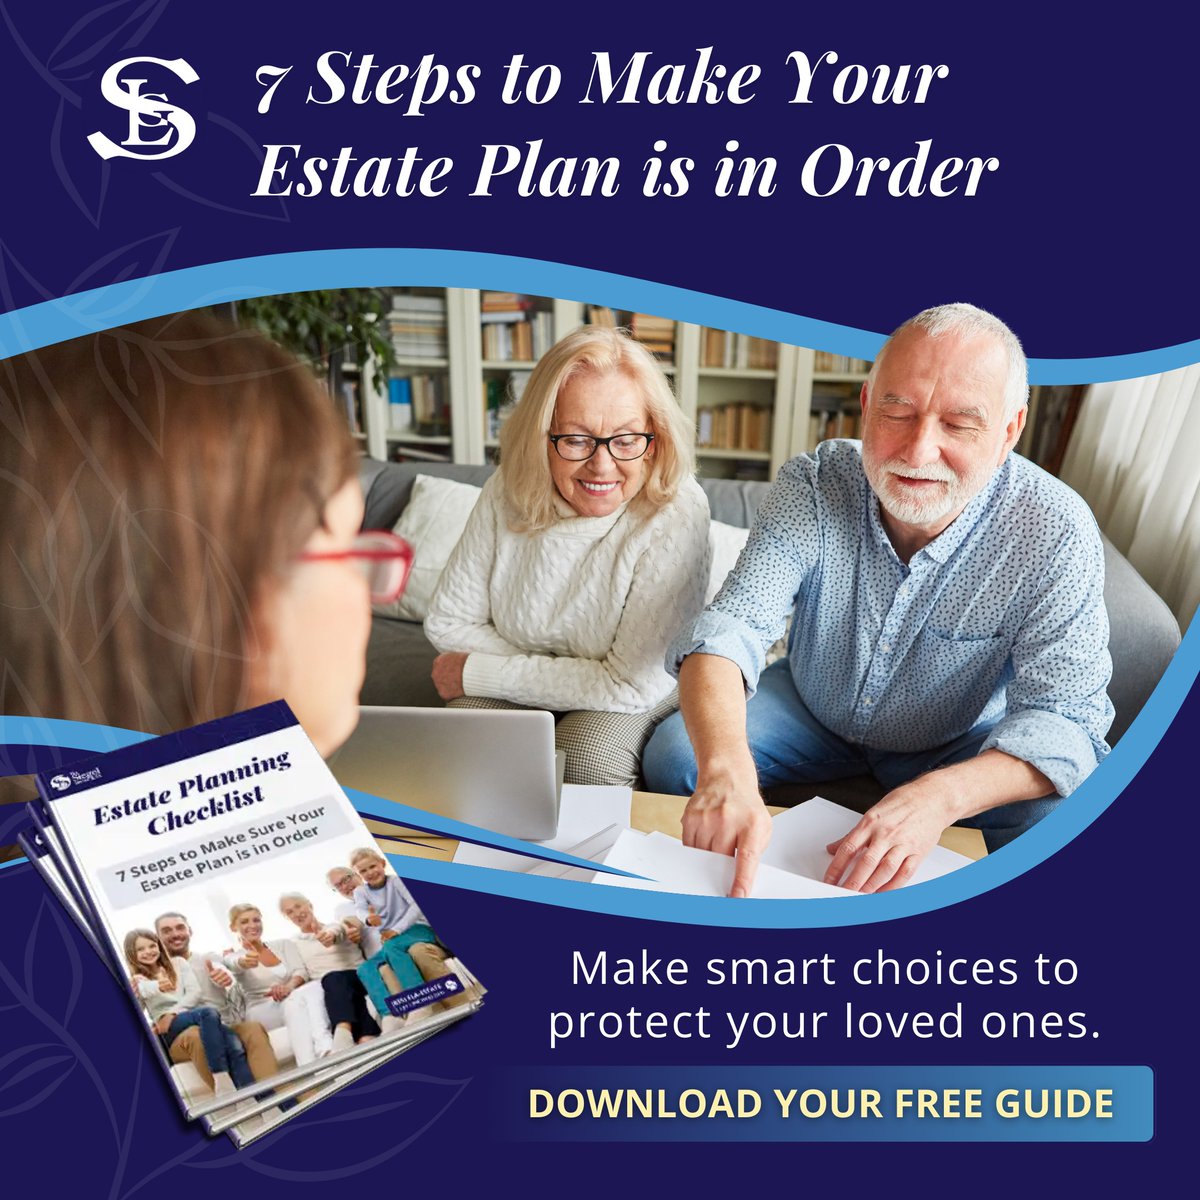 Now is the moment to ensure that your legacy aligns perfectly with your intentions.

Make smart choices to protect your loved ones. Download our FREE guide by visiting our website: siegellawgroup.com 
.
.
.

#EstatePlanning #FloridaEstatePlanning #TheSiegelLawGroup